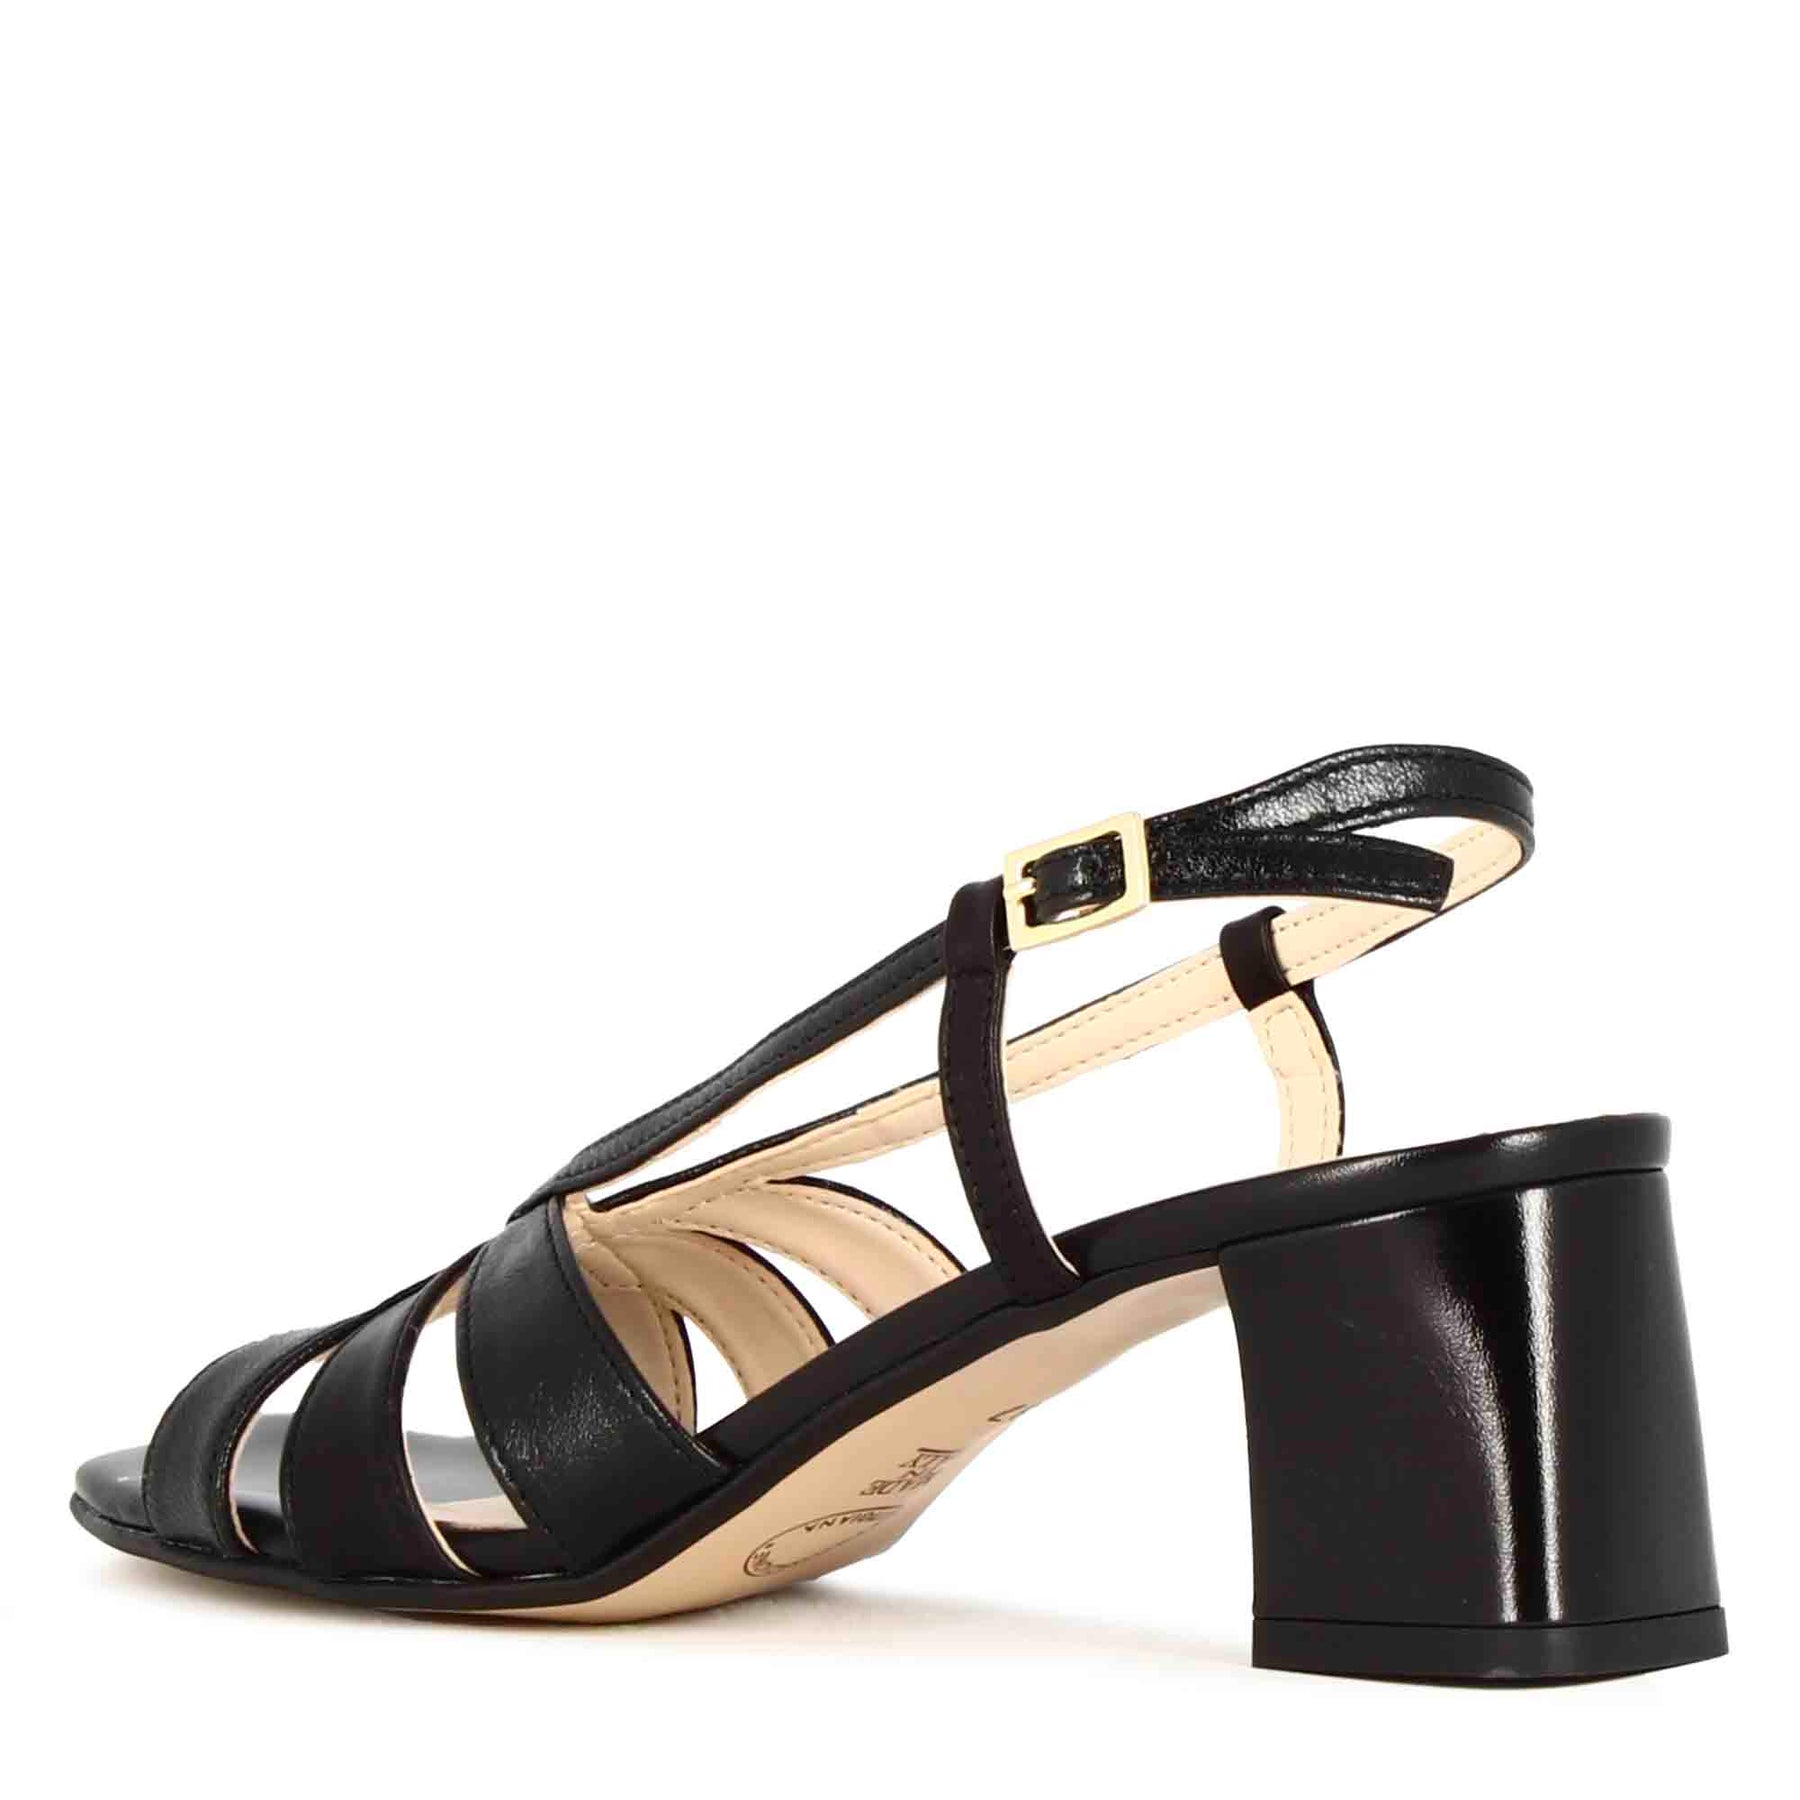 Classic black leather women's sandal with straps